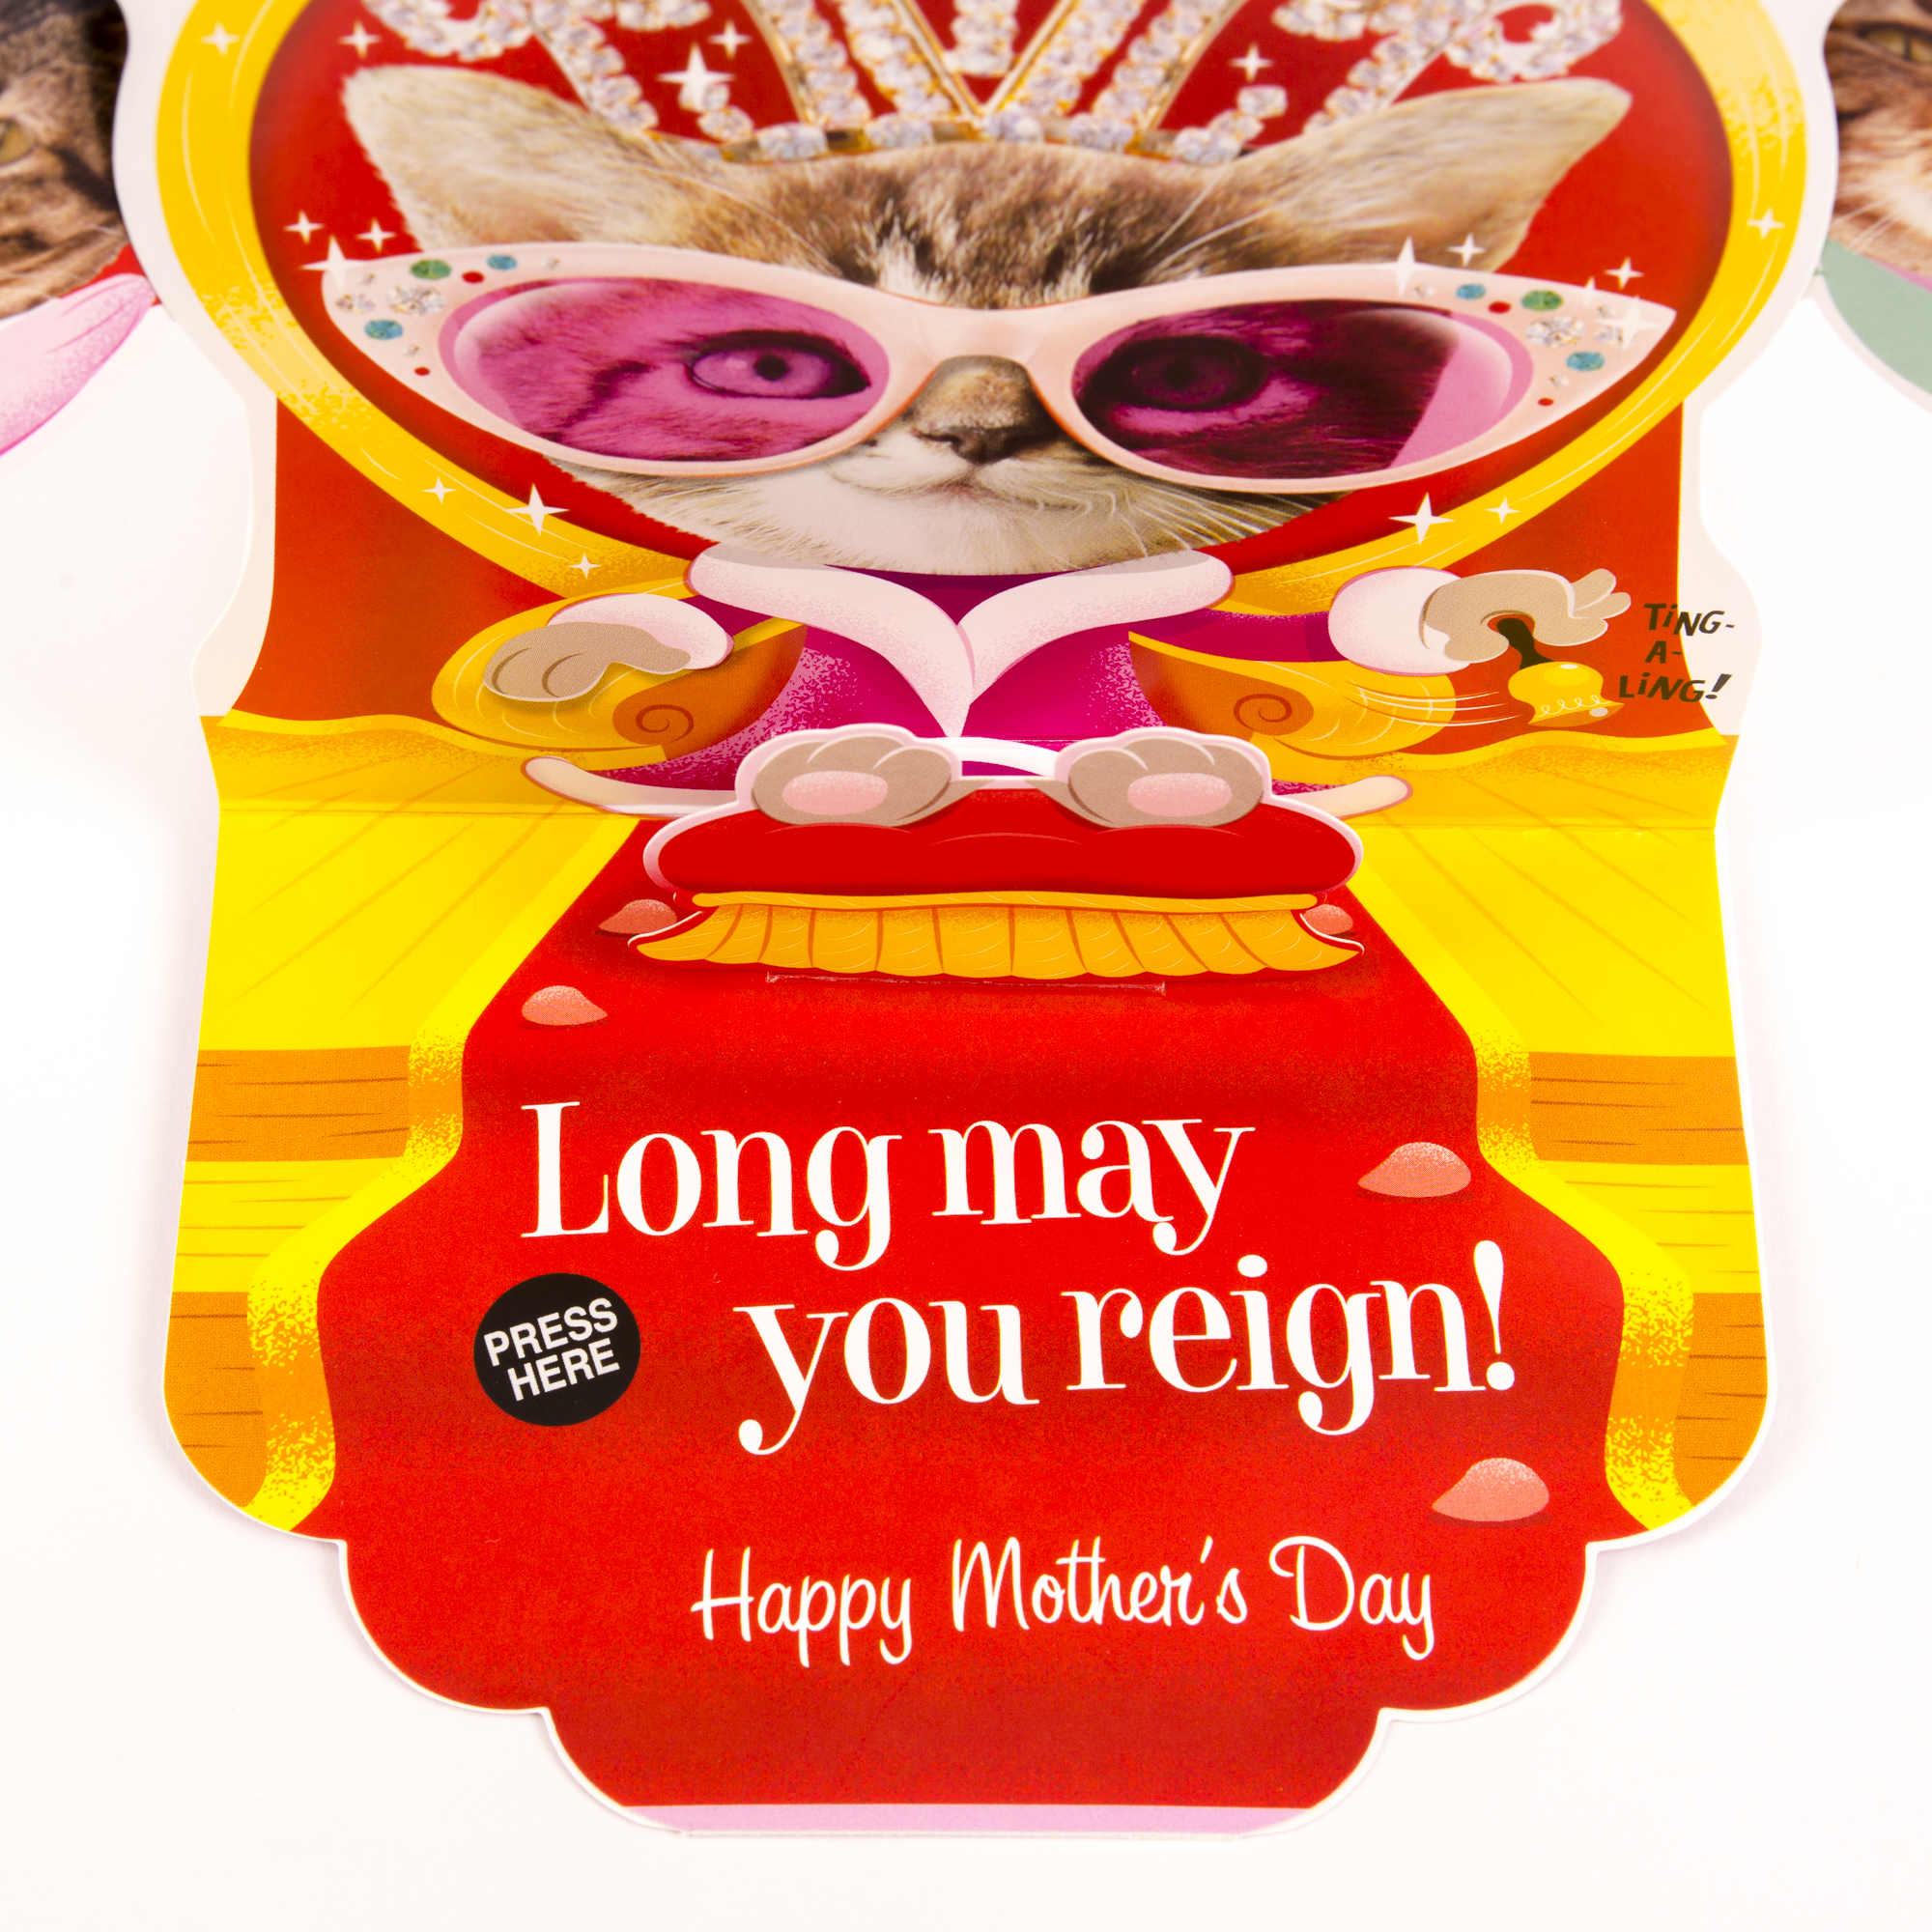 Hallmark Funny Pop Up Mother's Day Card with Song (Cat Queen, Plays Rule Britannia) - image 4 of 7